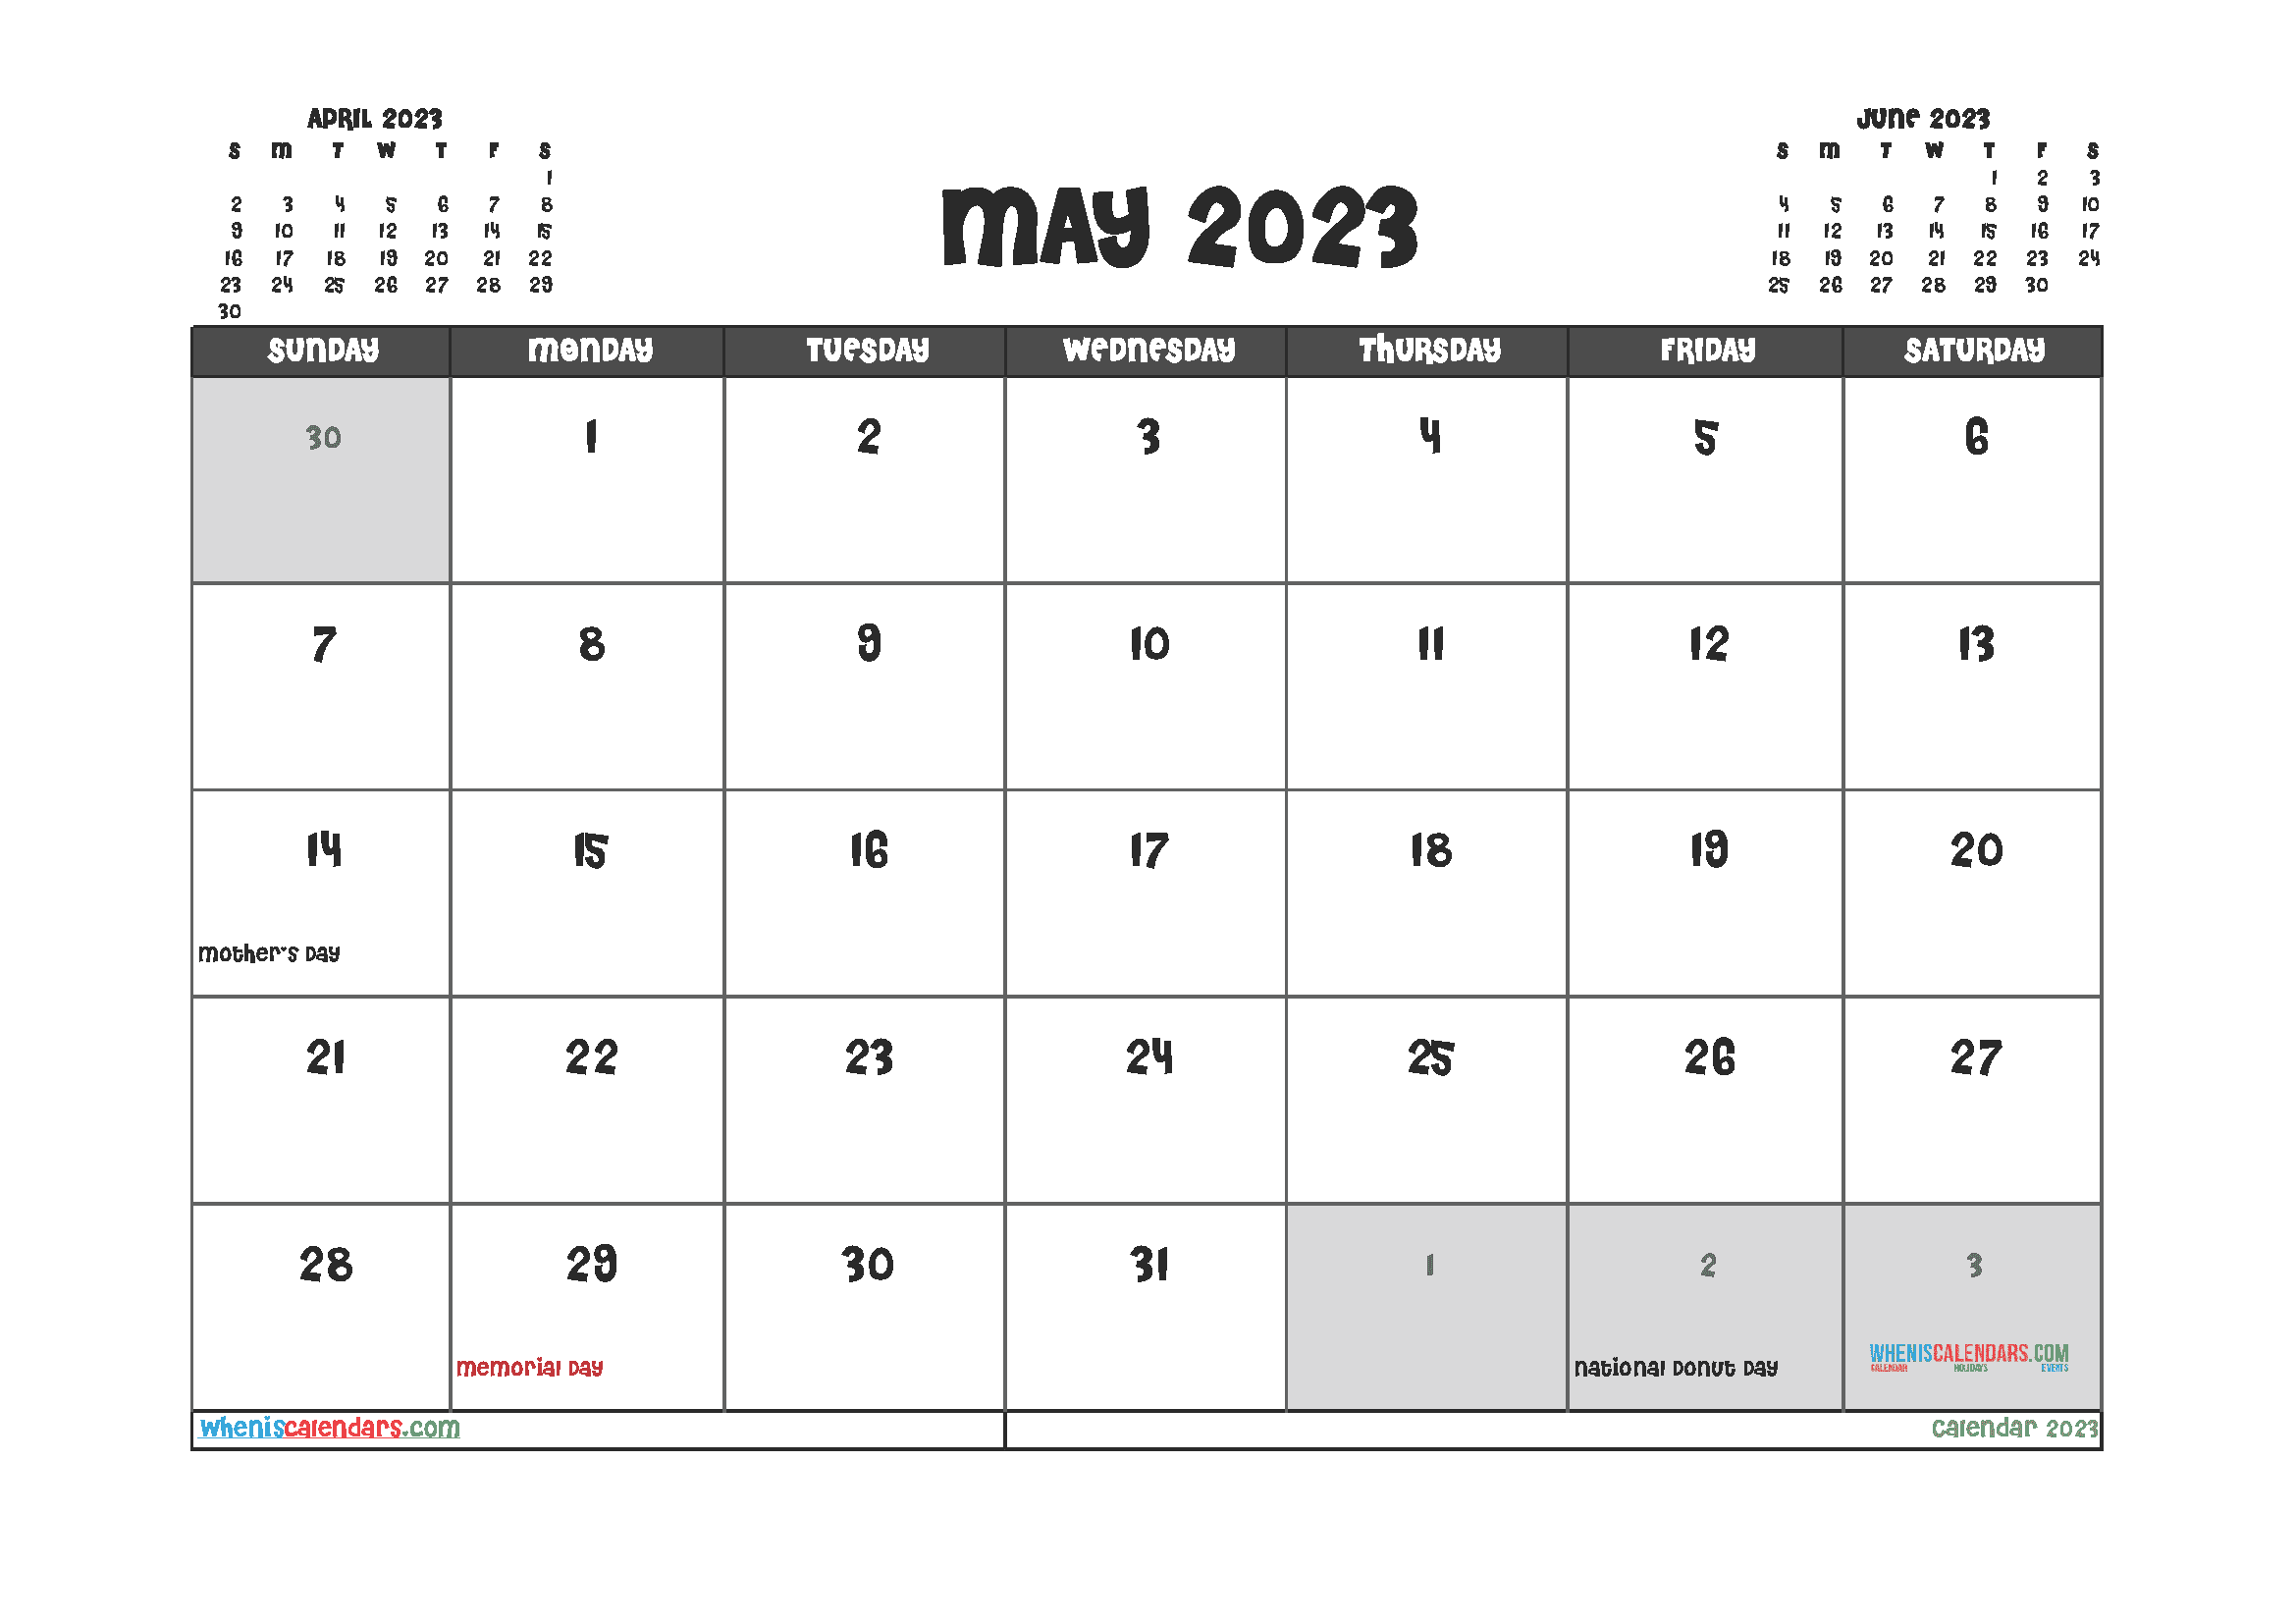 Free Printable Calendar May 2023 with Holidays PDF in Landscape